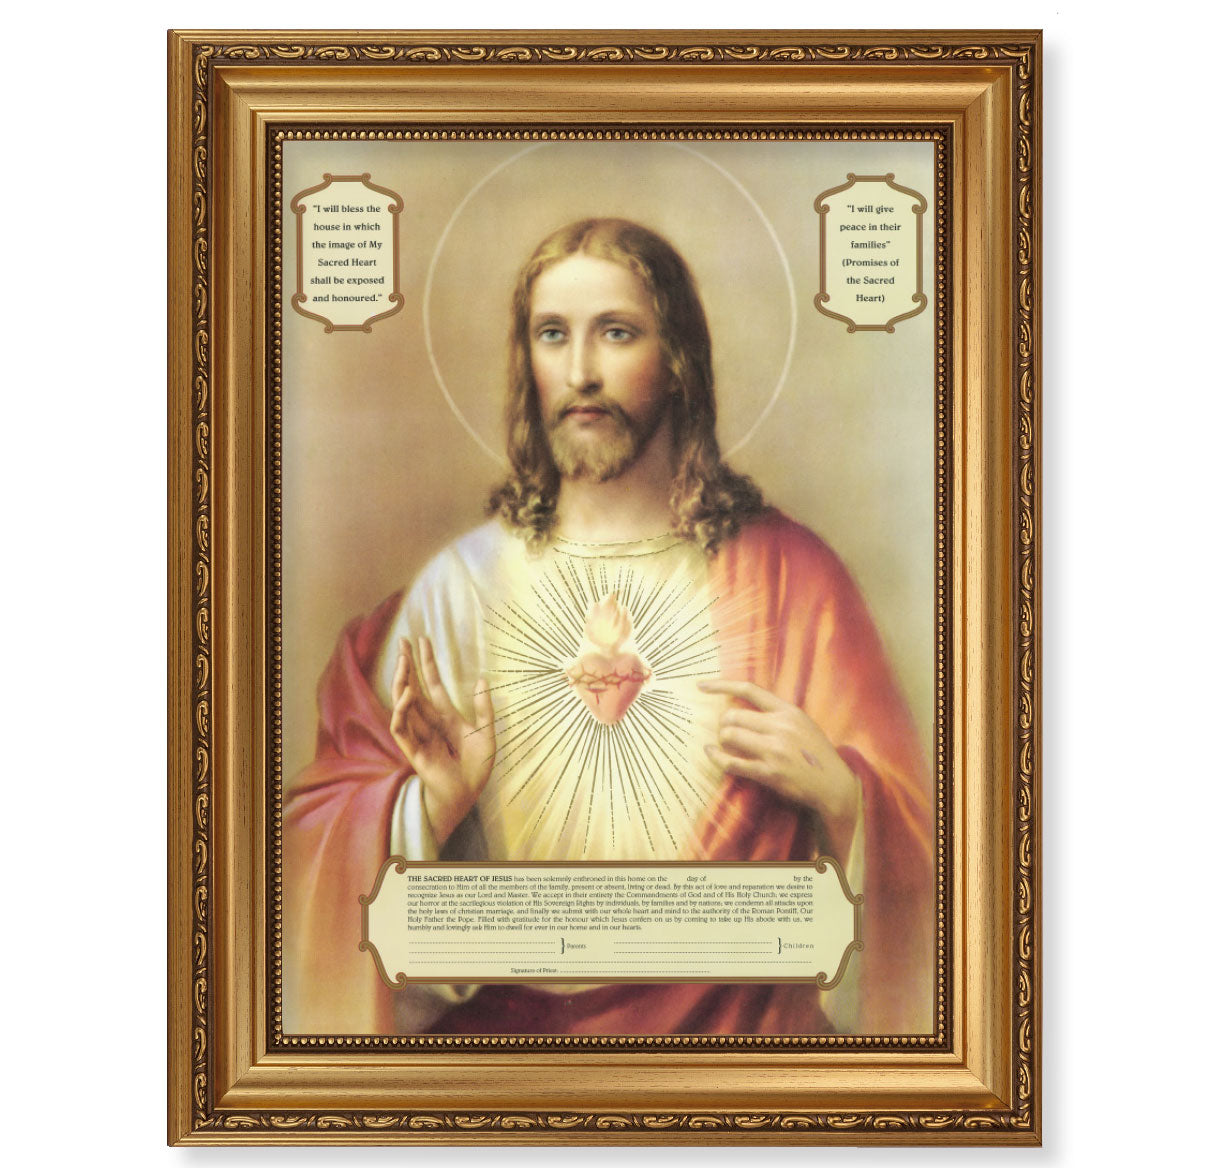 Sacred Heart of Jesus - Enthronement Antique Picture Framed Wall Art Decor Extra Large, Antique Gold-Leaf Frame with Acanthus-Leaf Trim and Beaded Lip